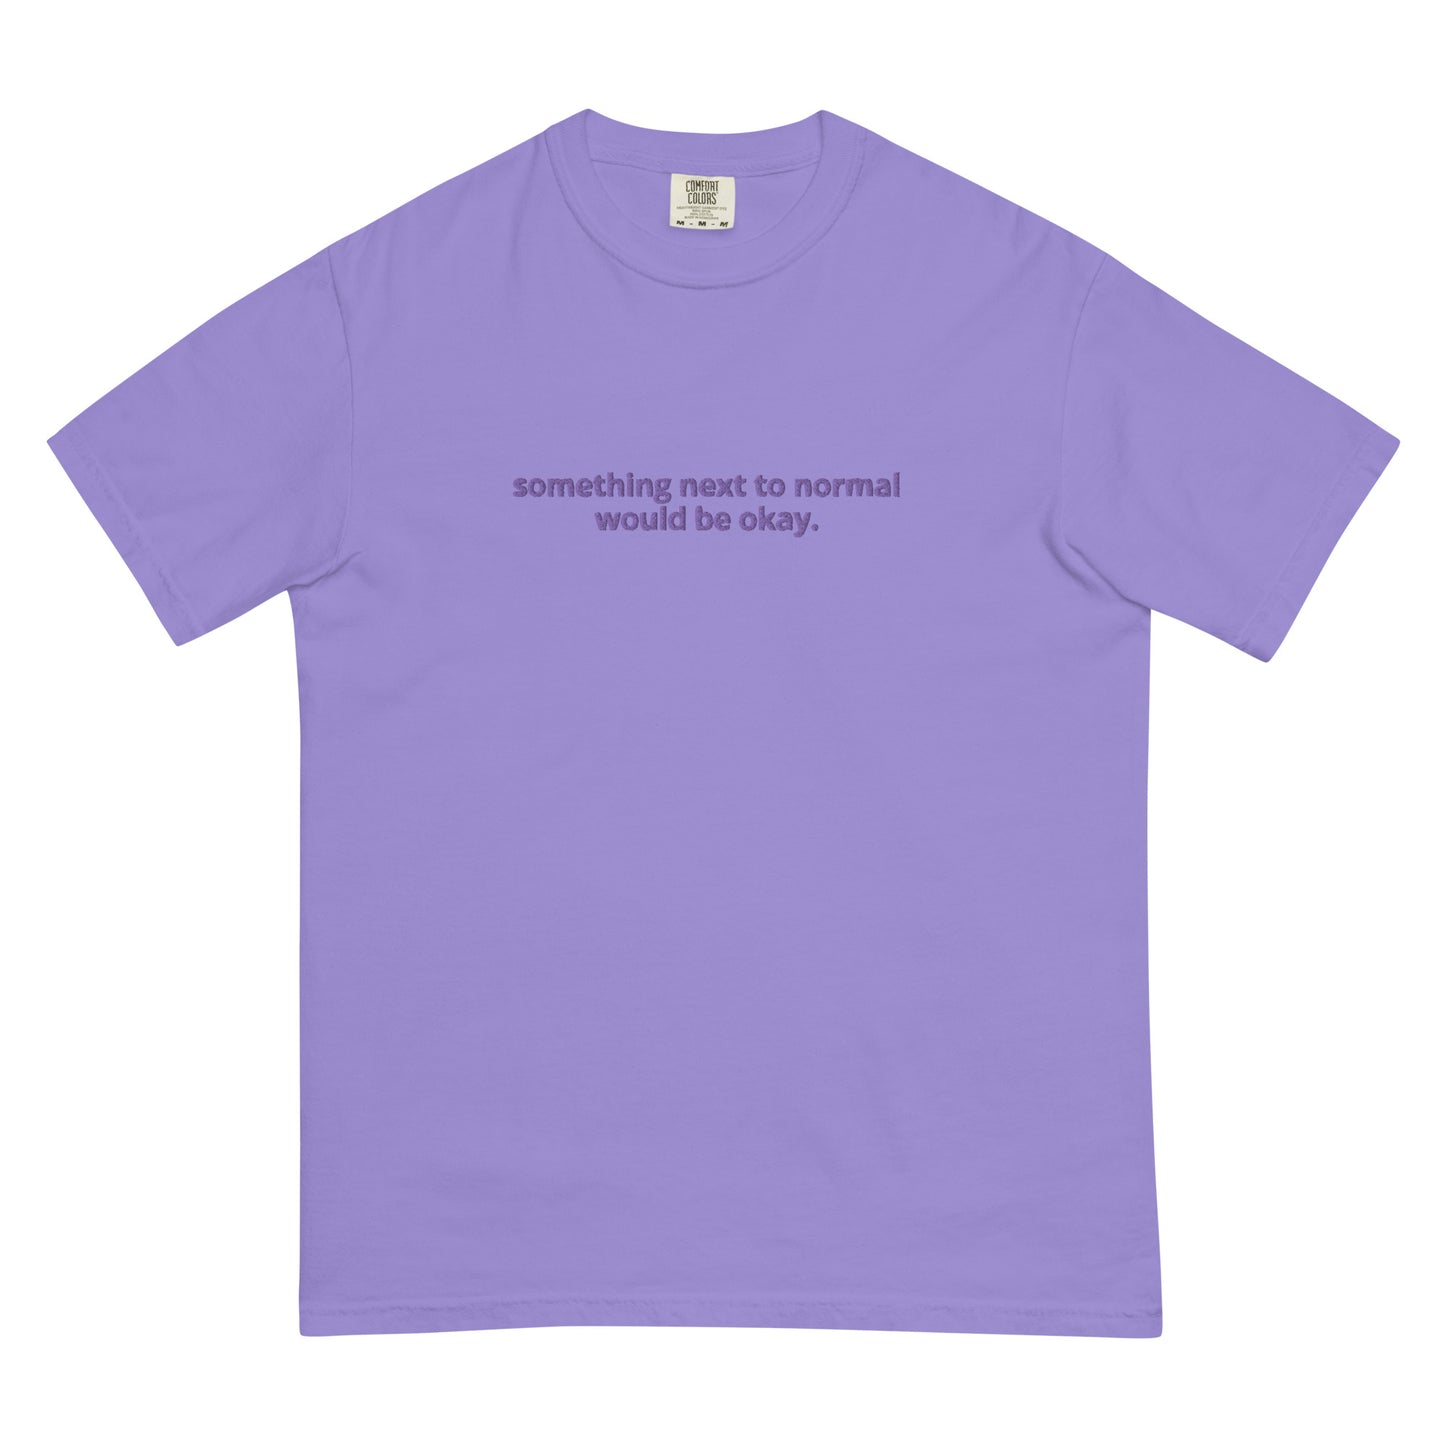 Nearing Normalcy Embroidered Monochromatic Heavyweight T-shirt